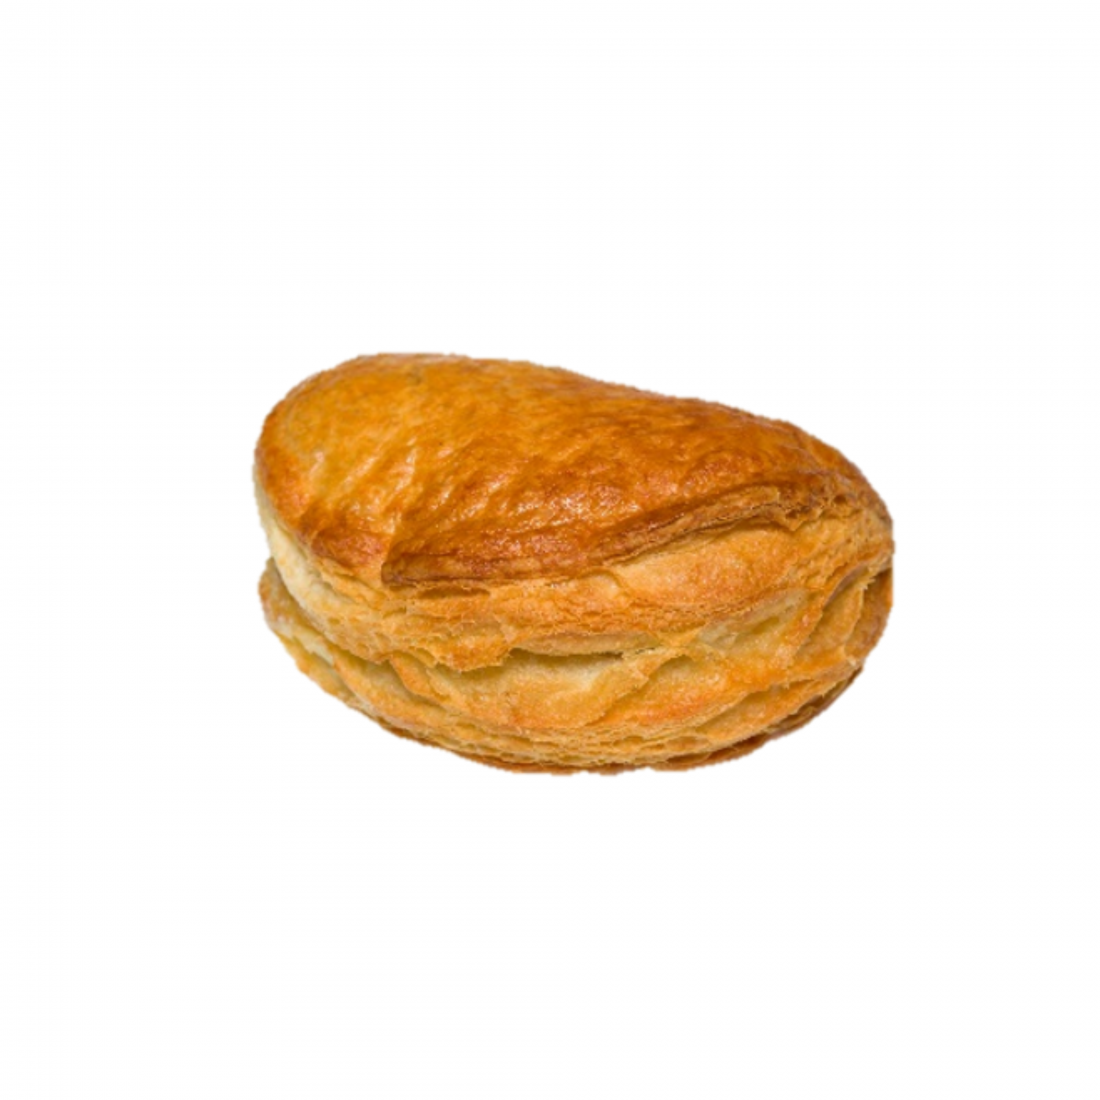 Bacon and egg pastry